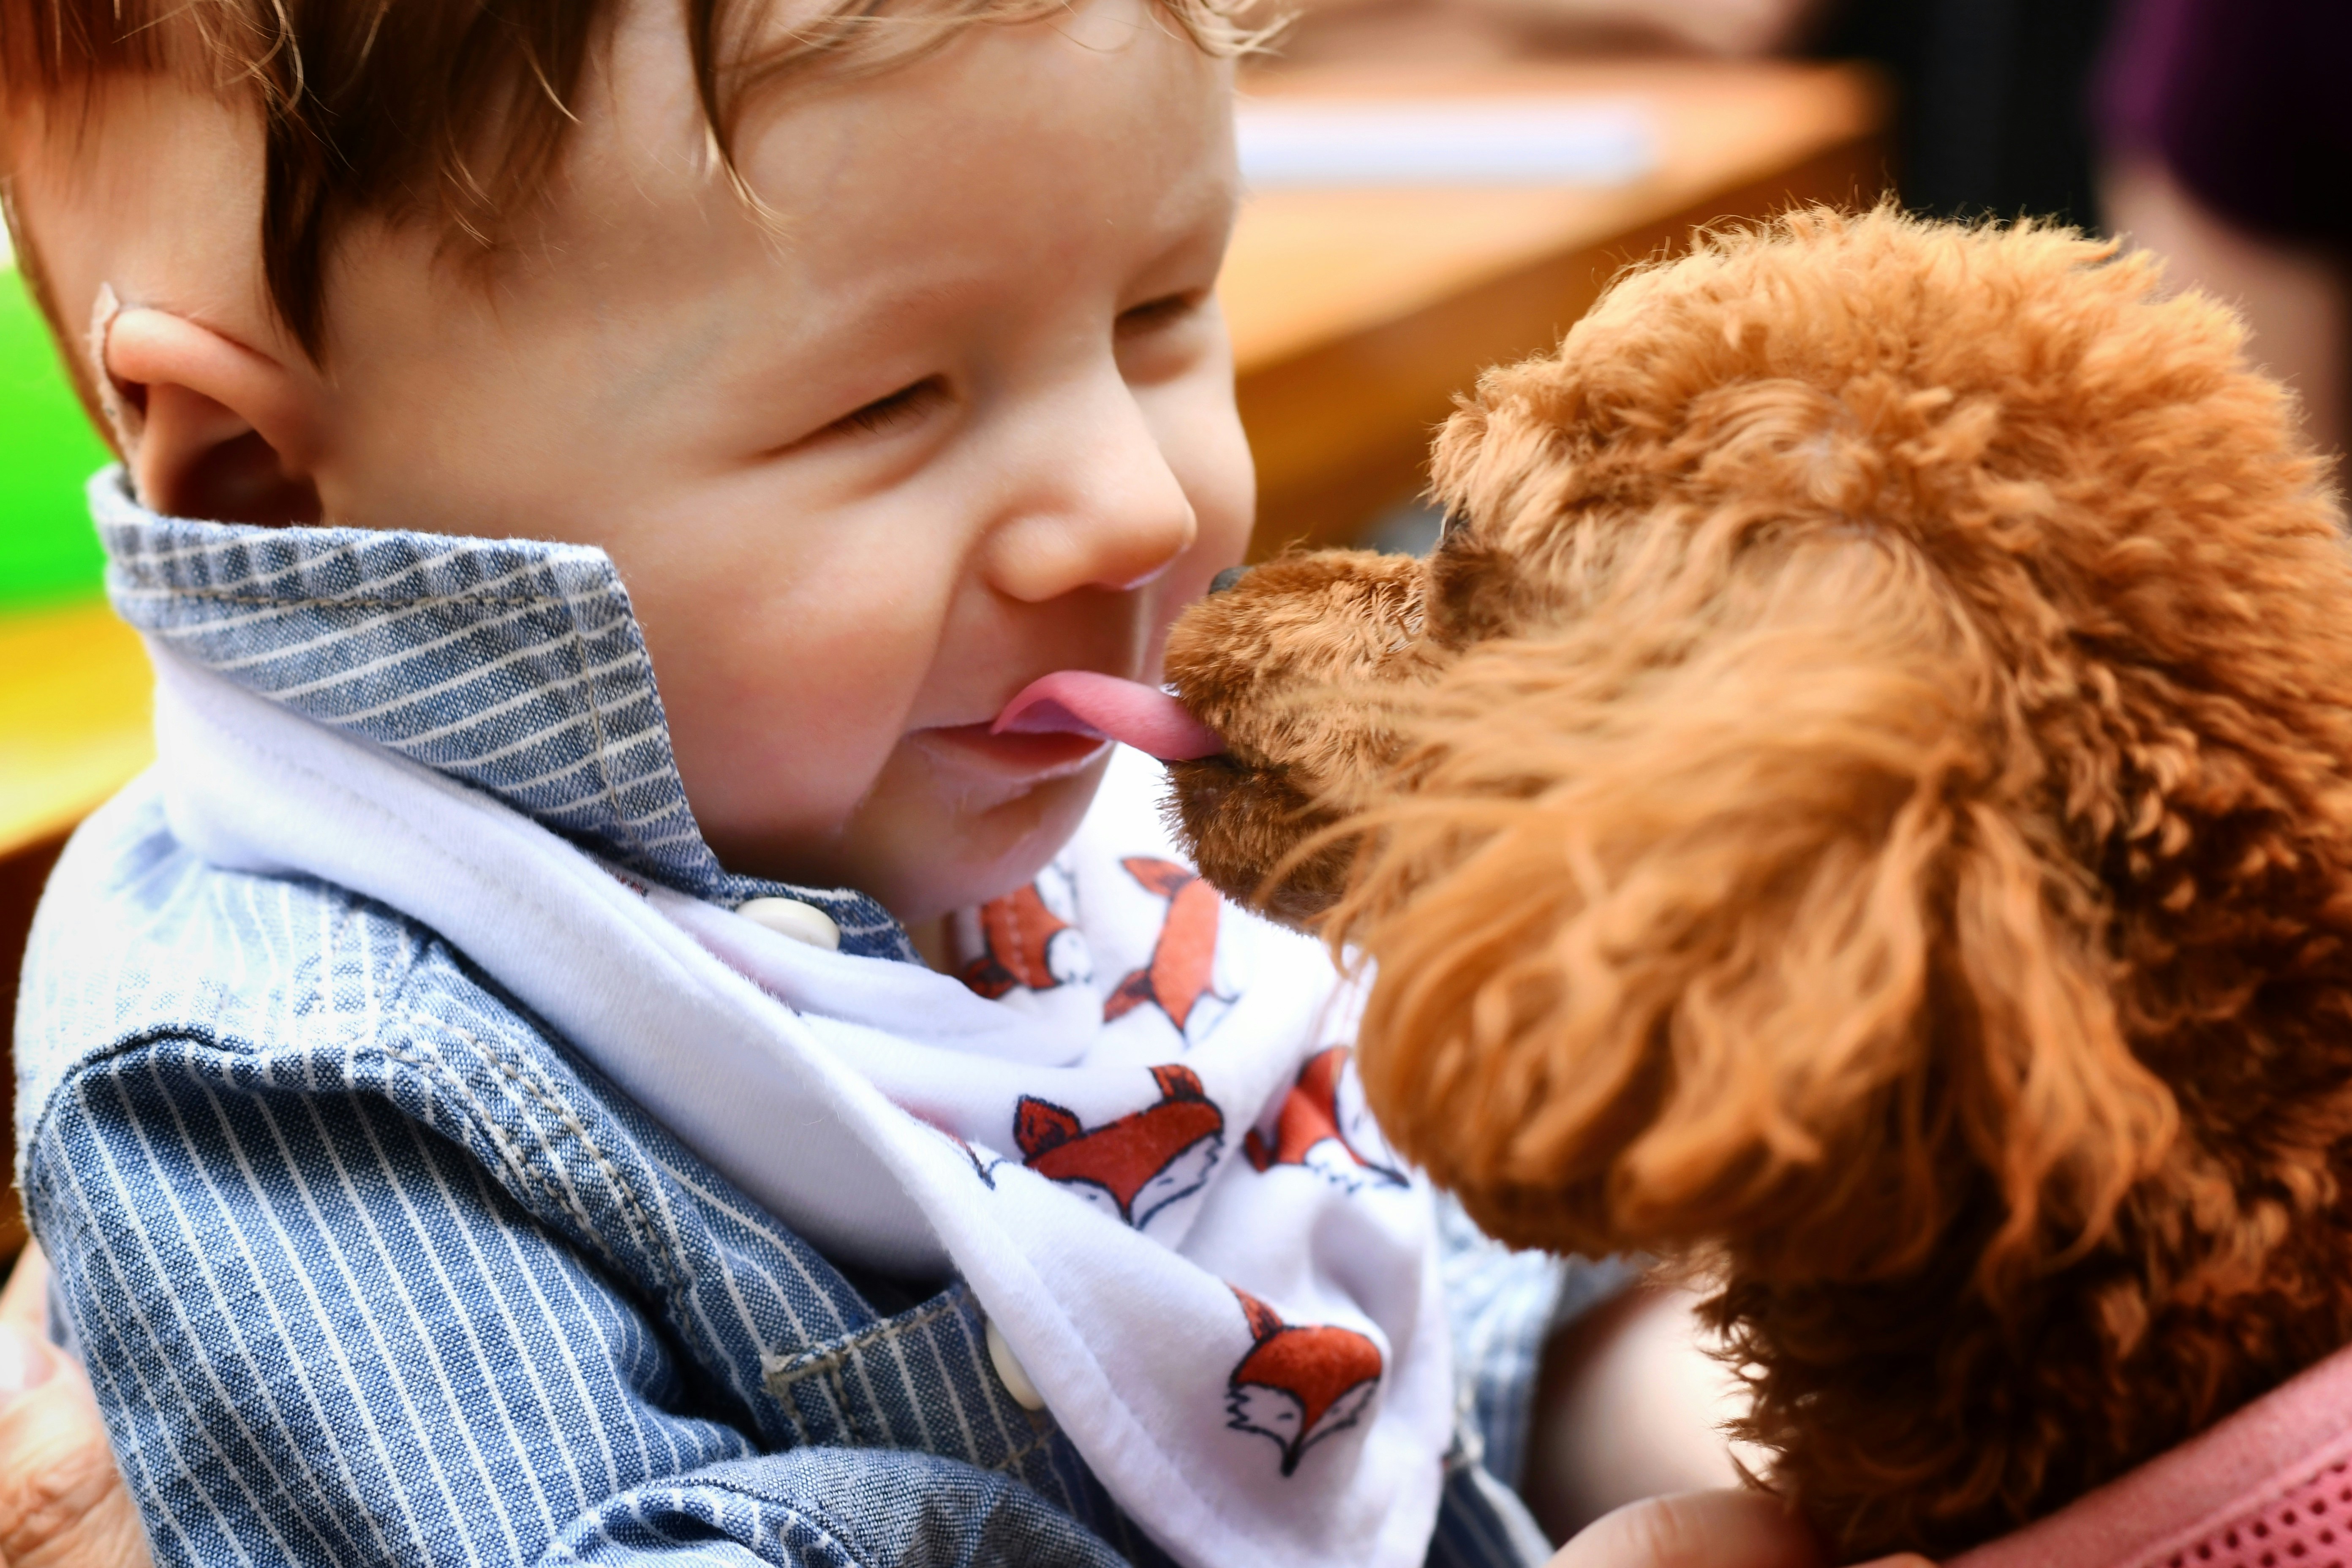 toy poodle dog licking face of little boy